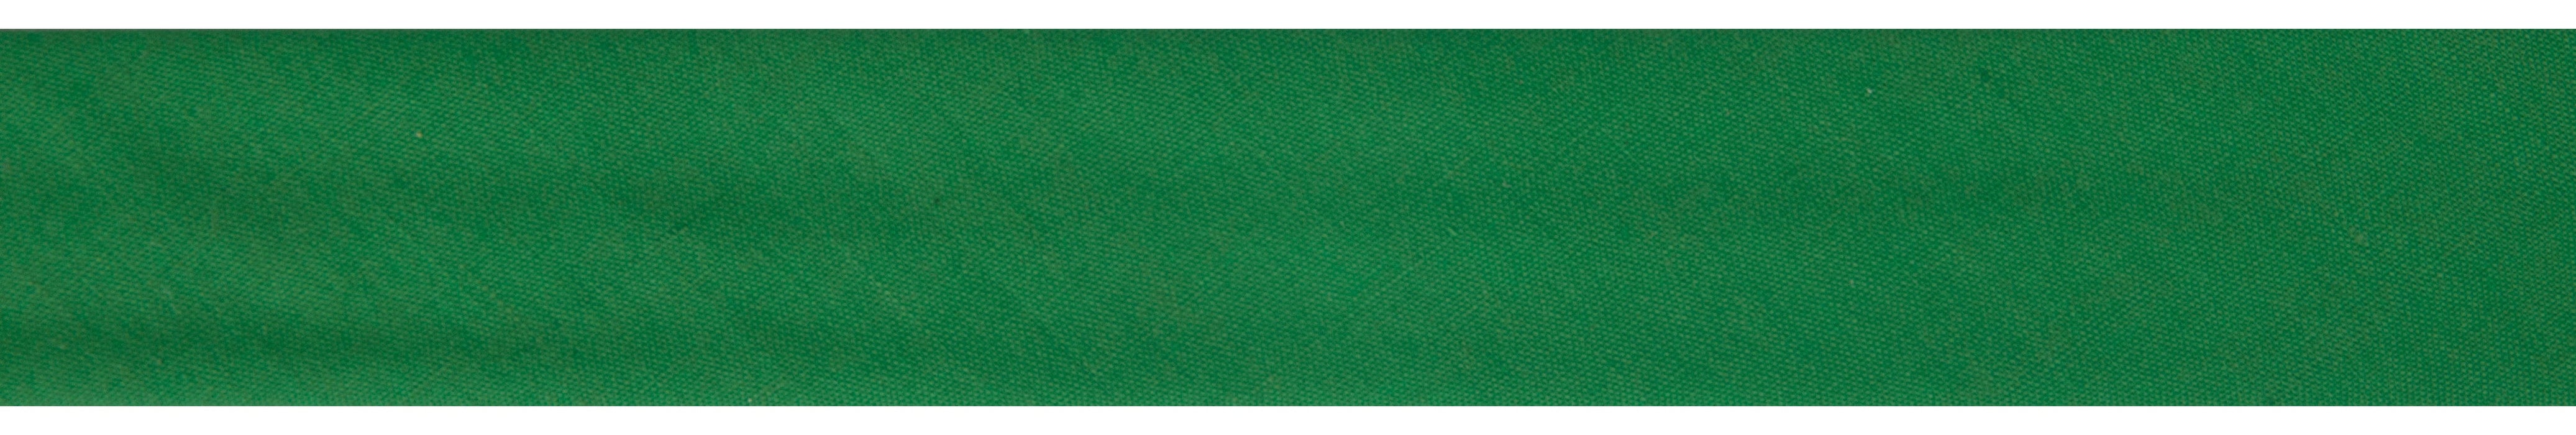 20m roll of Emerald Green Bias Binding | 25mm width from Jaycotts Sewing Supplies